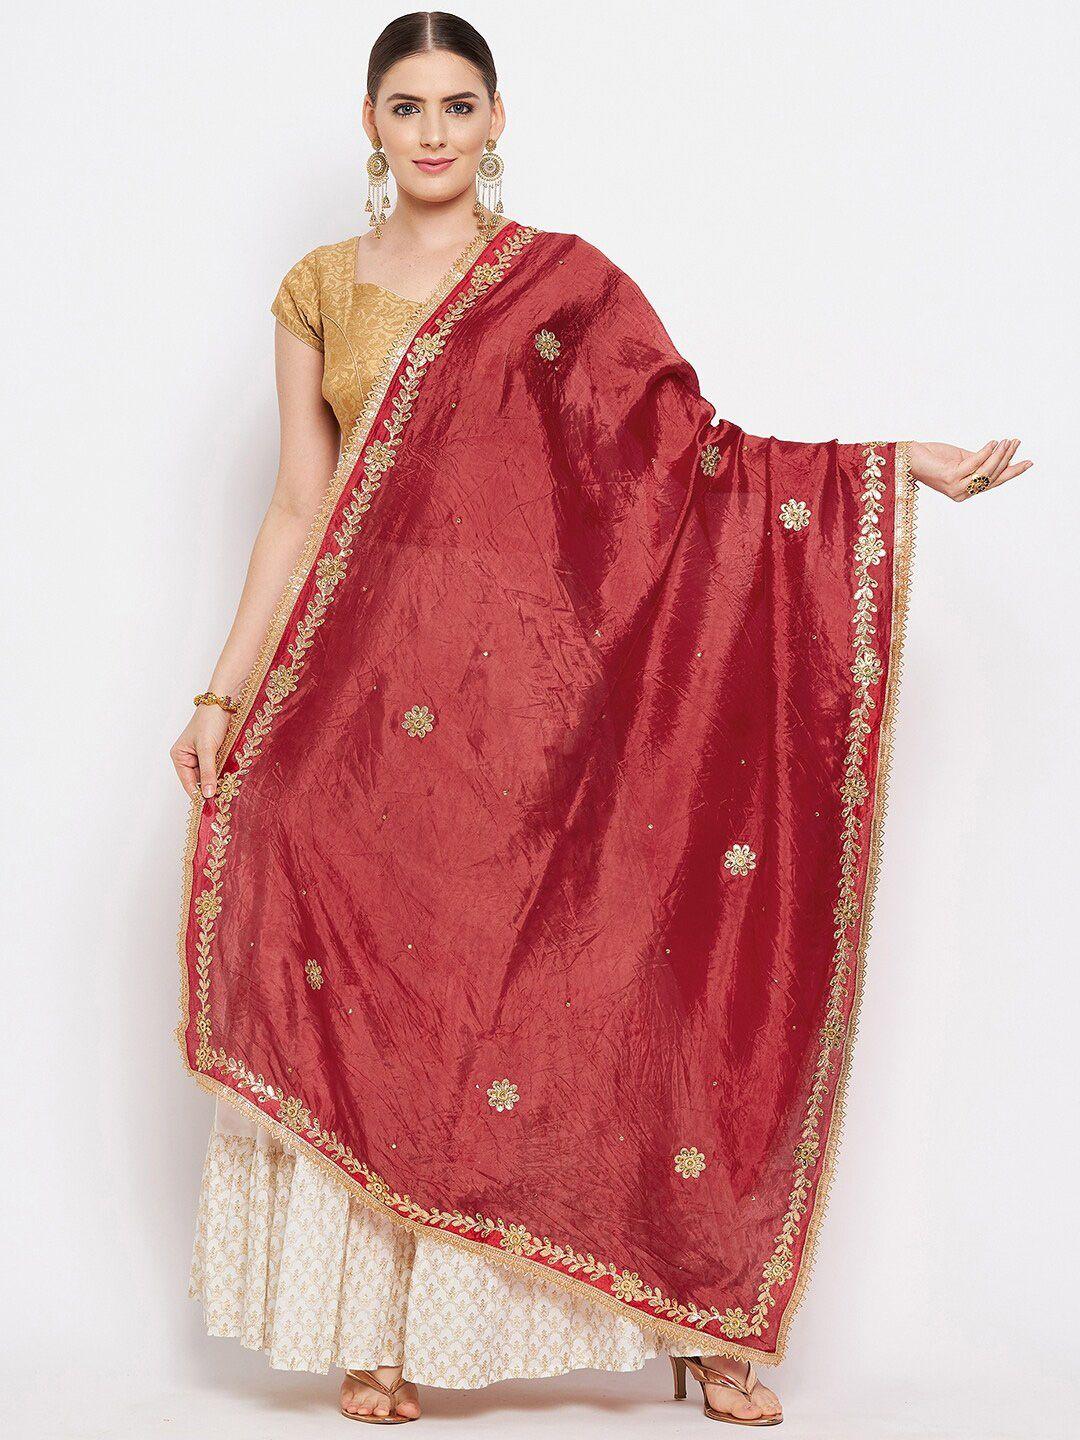 clora-creation-red-&-gold-toned-embroidered-silk-blend-dupatta-with-beads-and-stones